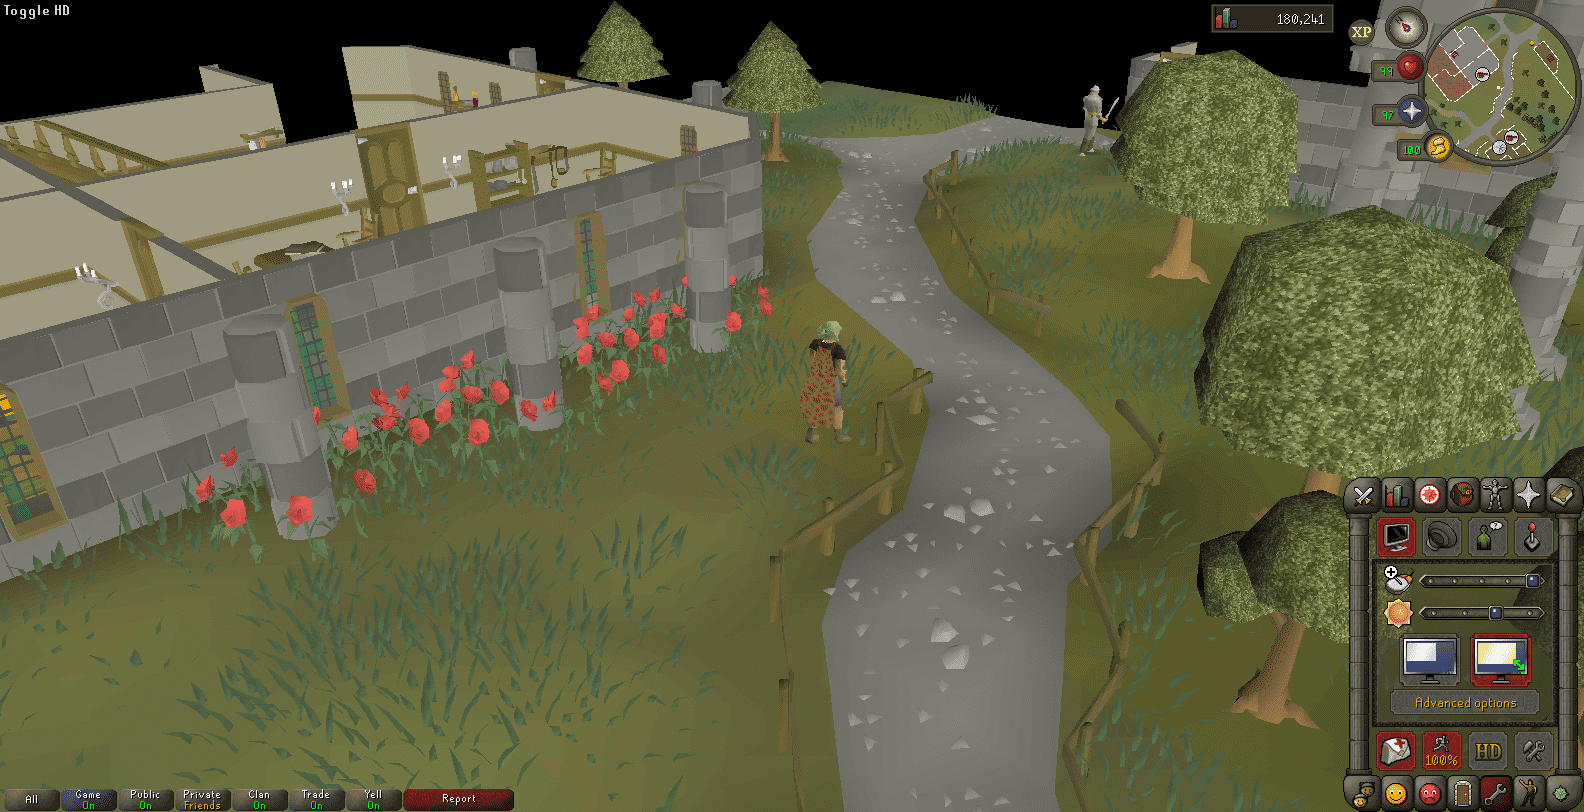 Mm0Dgds - [OSRS] Alora: Quality Old-School Gameplay! - RaGEZONE Forums